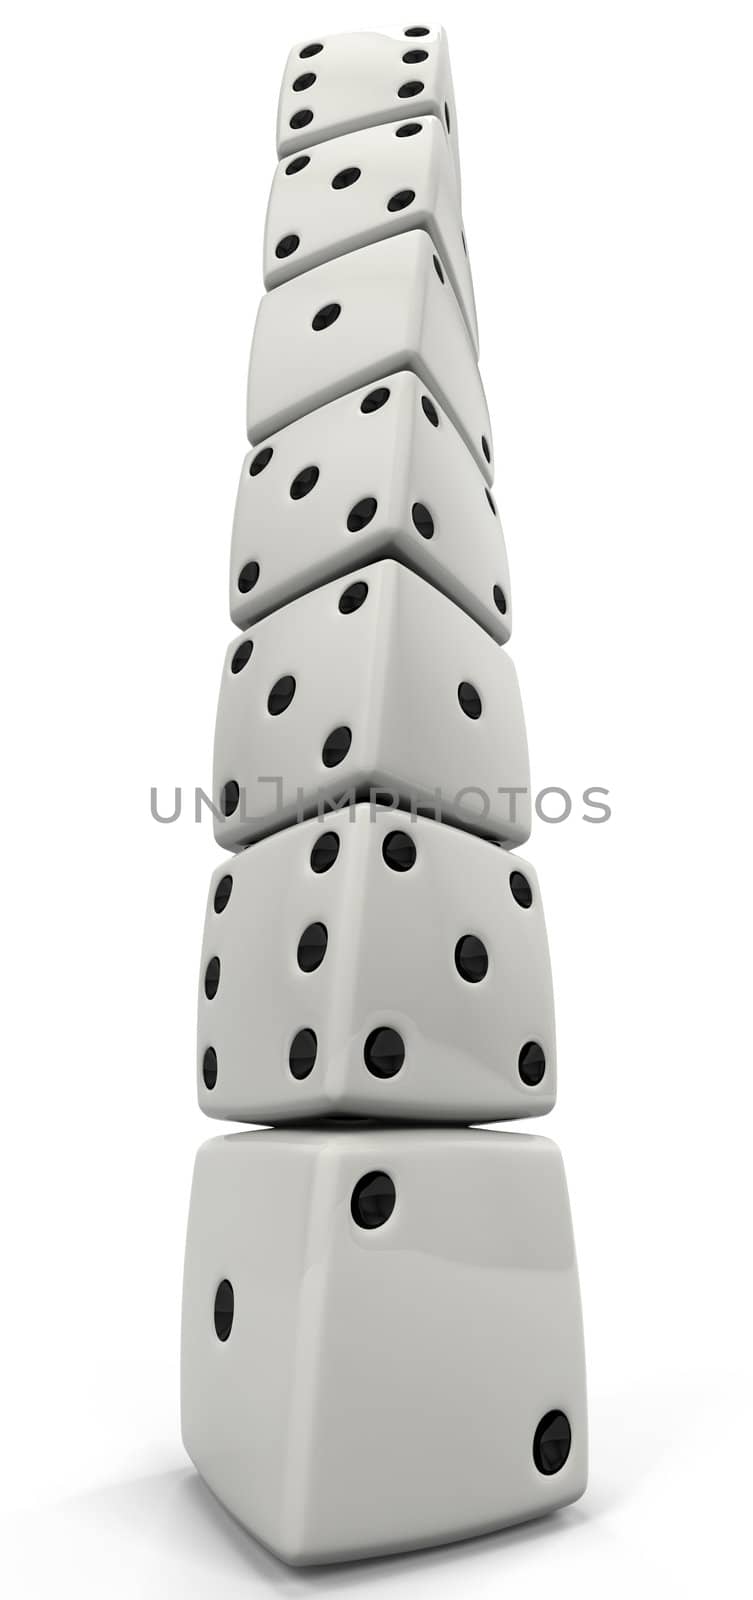 Tower of Dice, Looking UP by LeoBlanchette